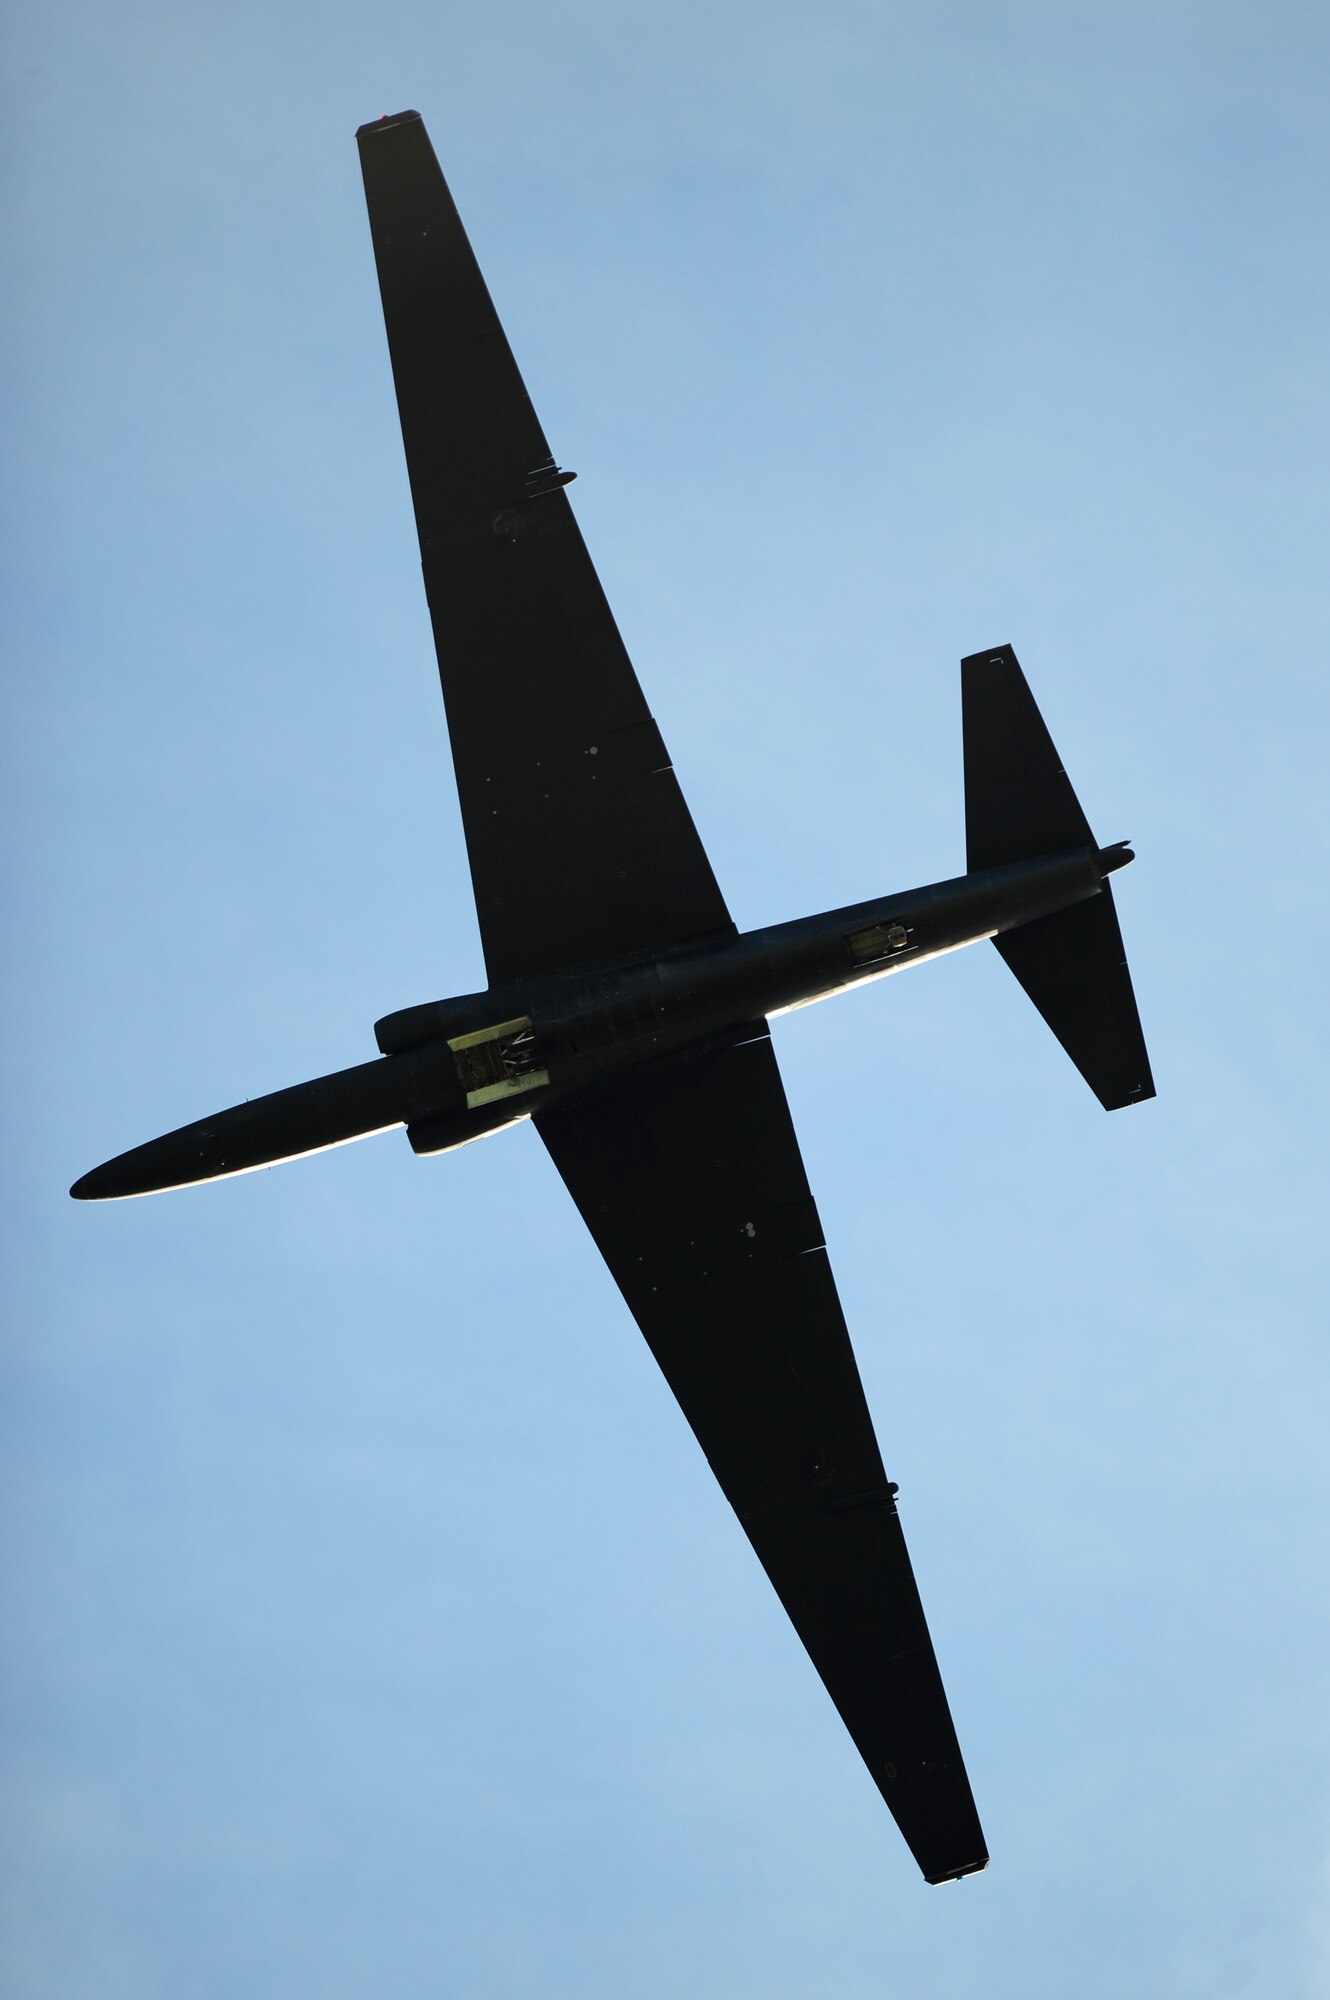 A U-2 Dragon Lady conducts a training sortie above Beale Air Force Base, Calif., Jan. 21, 2014. The Dragon Lady flies at altitudes more than 70,000 ft. and has a wingspan of 105 ft. (U.S. Air Force photo by Airman 1st Class Bobby Cummings/Released)